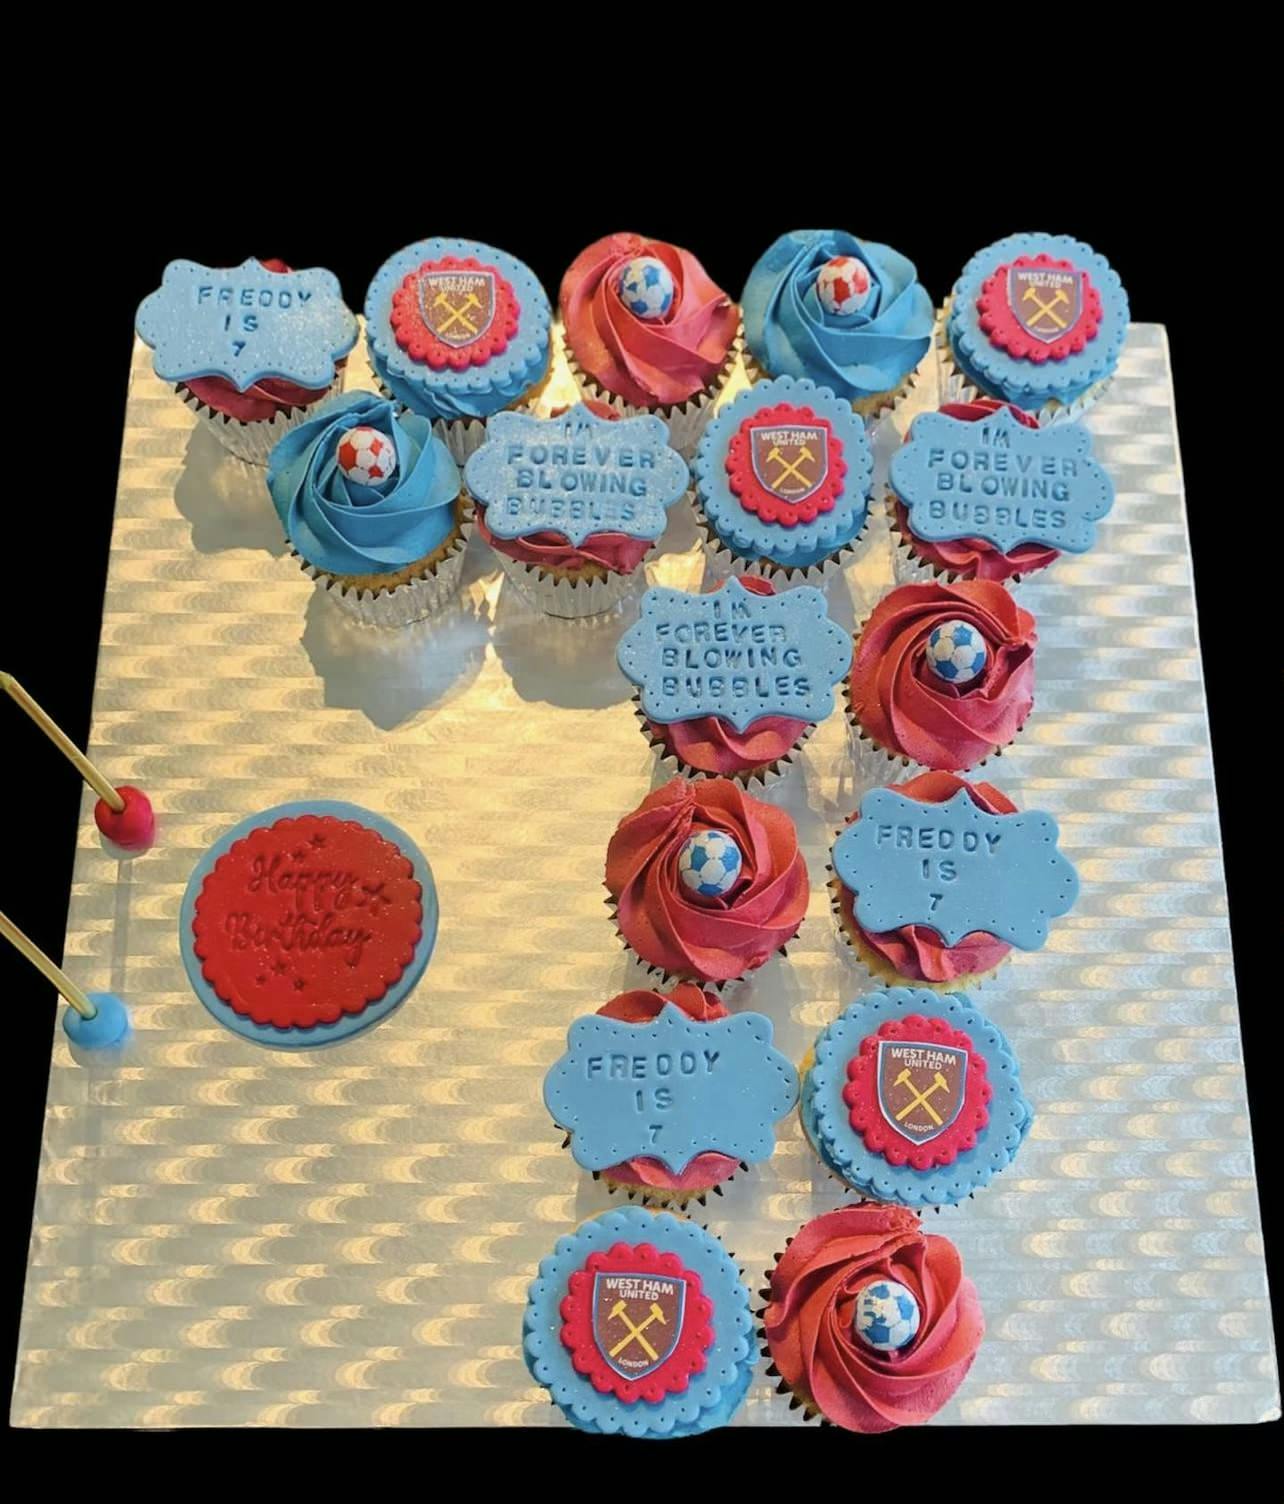 Cupcakes in the shape of the number seven with blue and red toppings and West Ham United logos